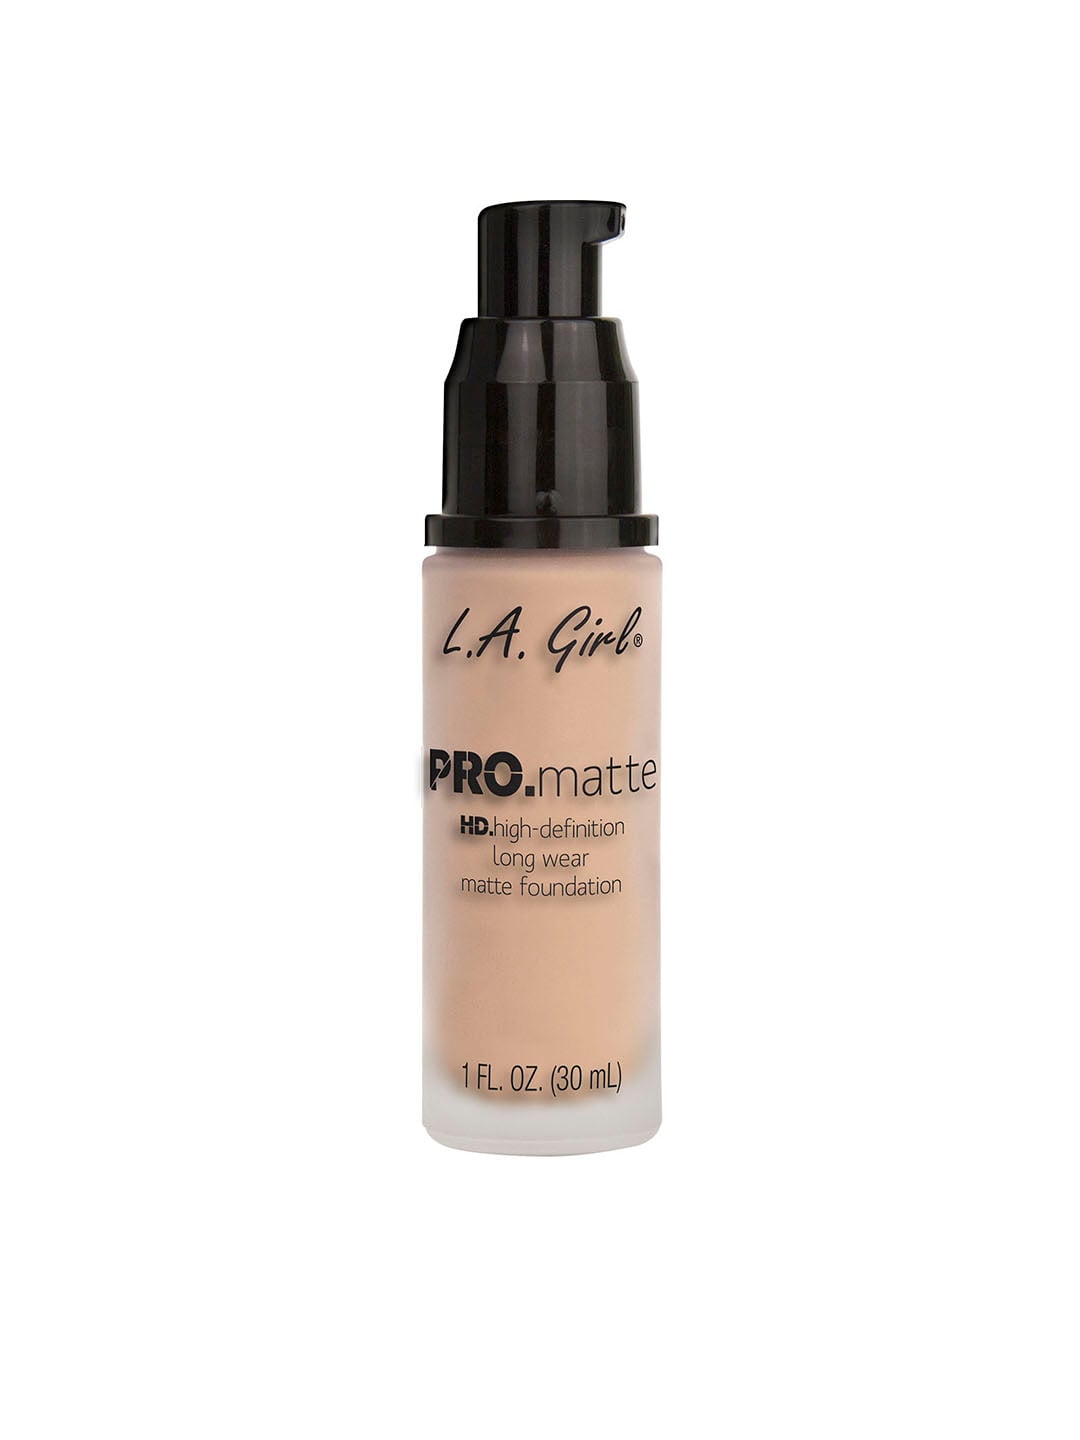 L.A Girl Porcelain Pro Matte HD Foundation GLM715 Price in India